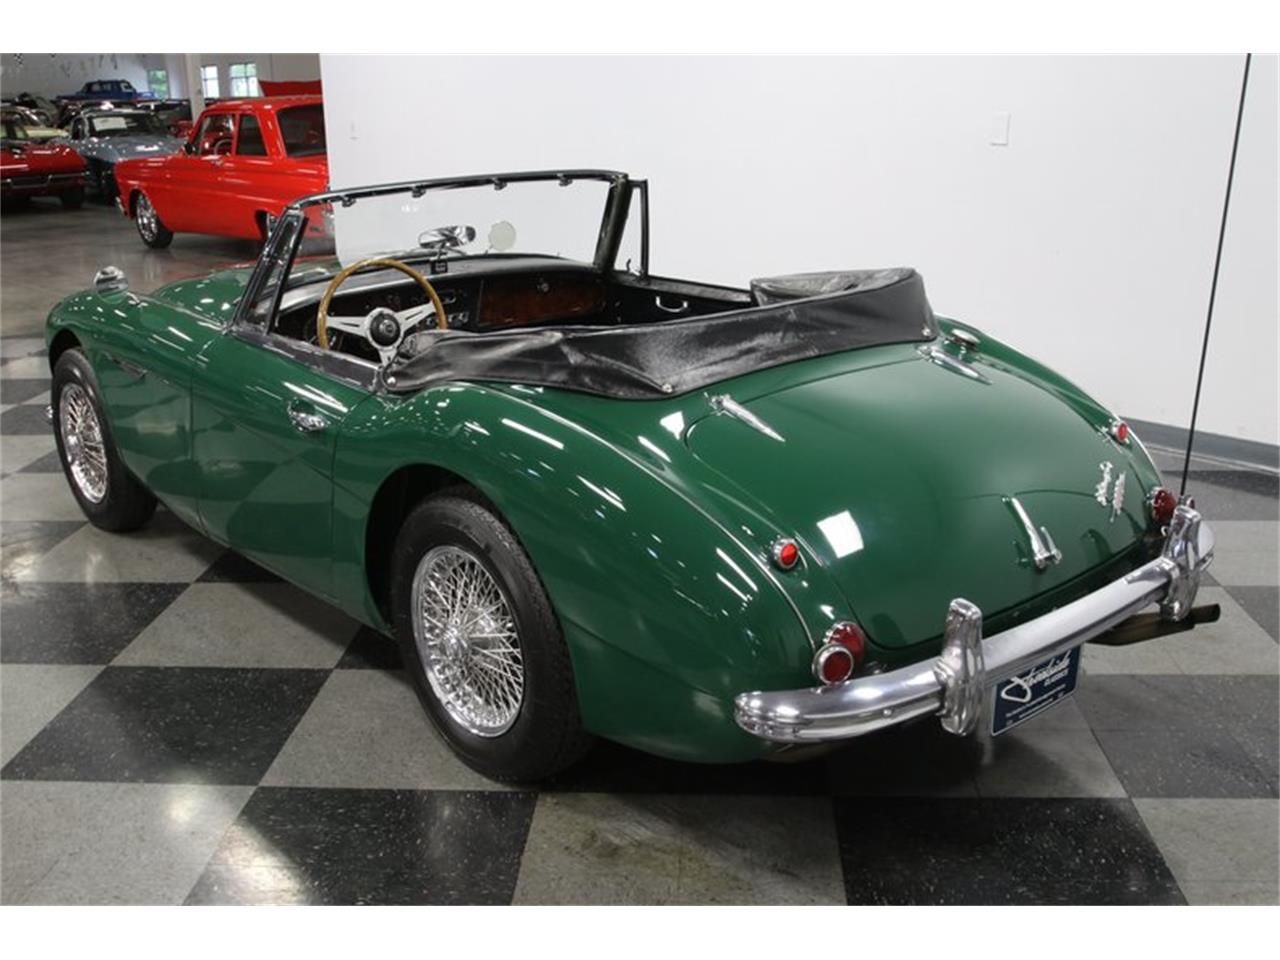 1965 Austin-Healey 3000 Mark III BJ8 for sale in Concord ...